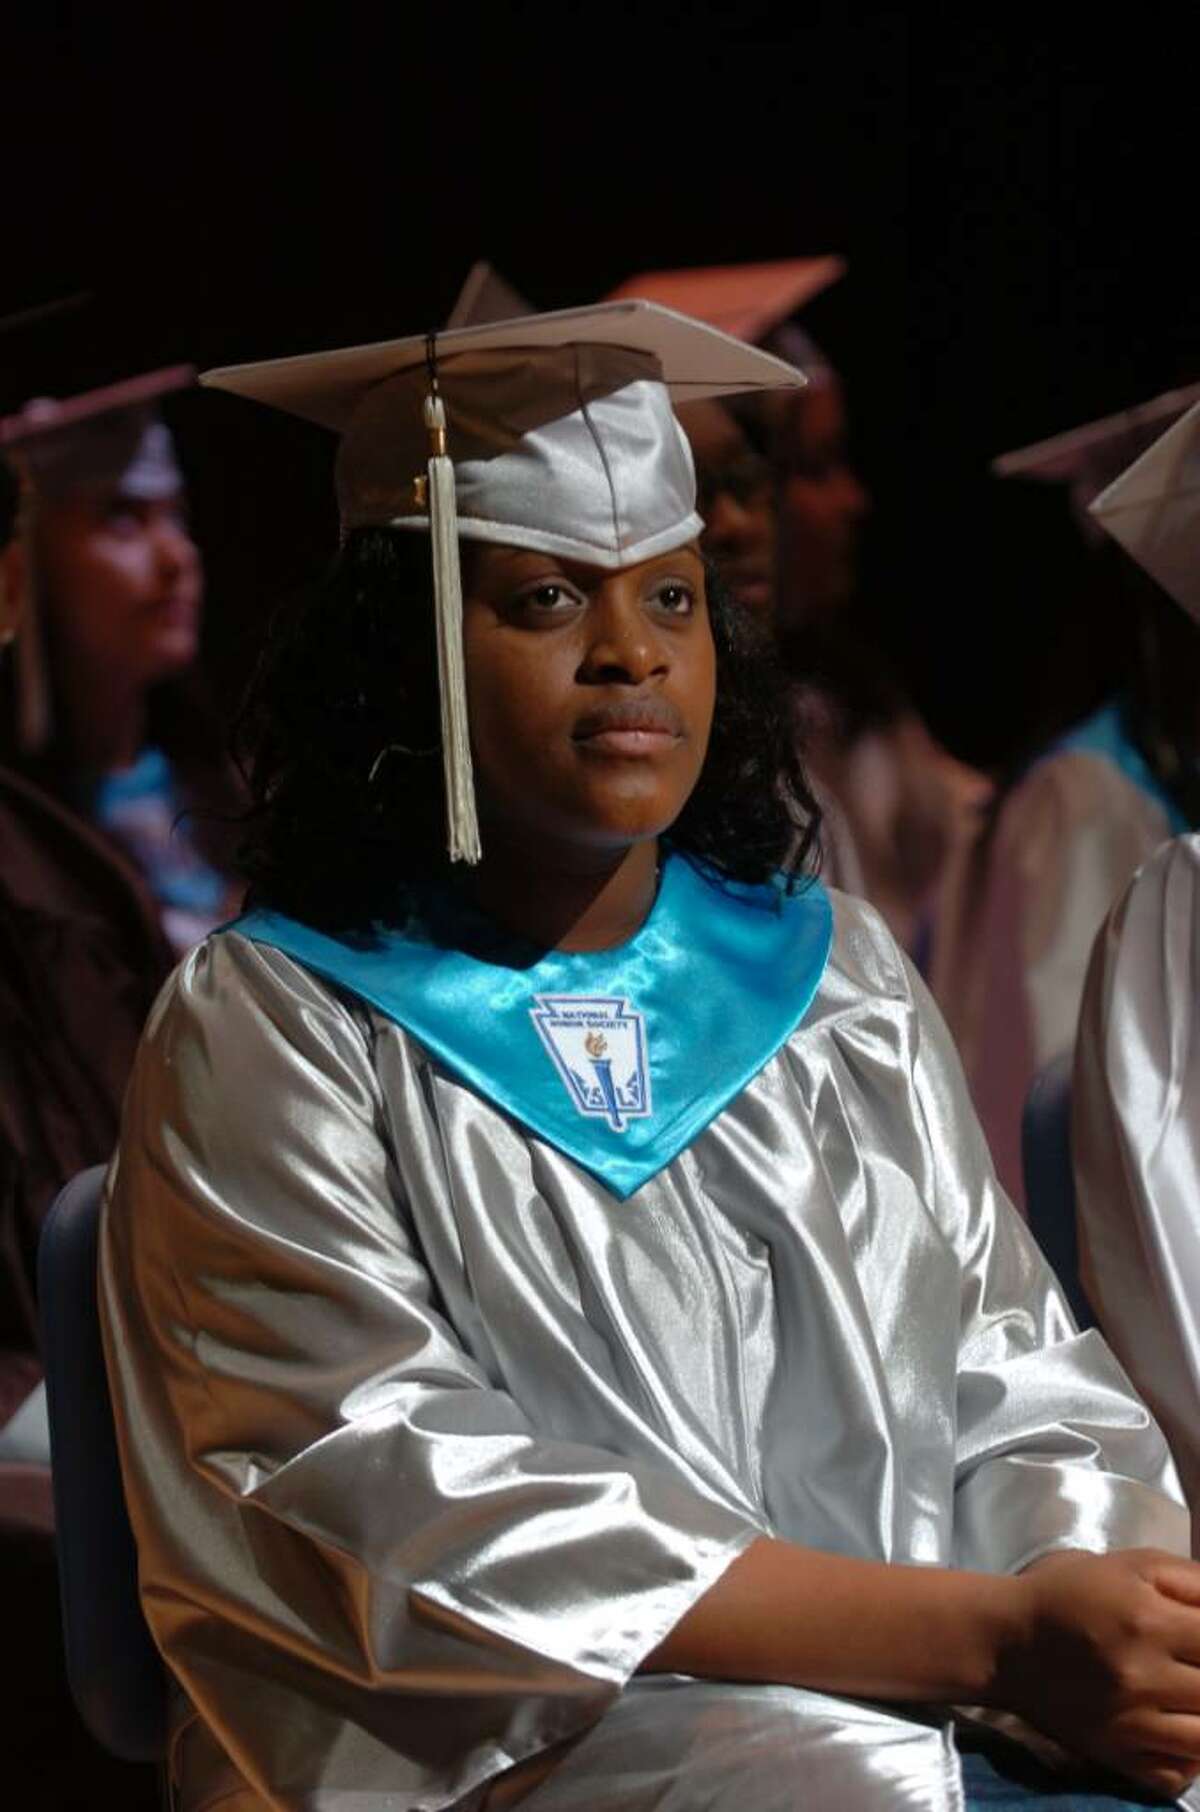 Highlights from Bridge Academy's 13th Annual Commencement Exercises held at Thurgood Marshall Middle School in Bridgeport, Conn. on Wednesday evening June 16, 2010. Graduate Shenice Bennett.